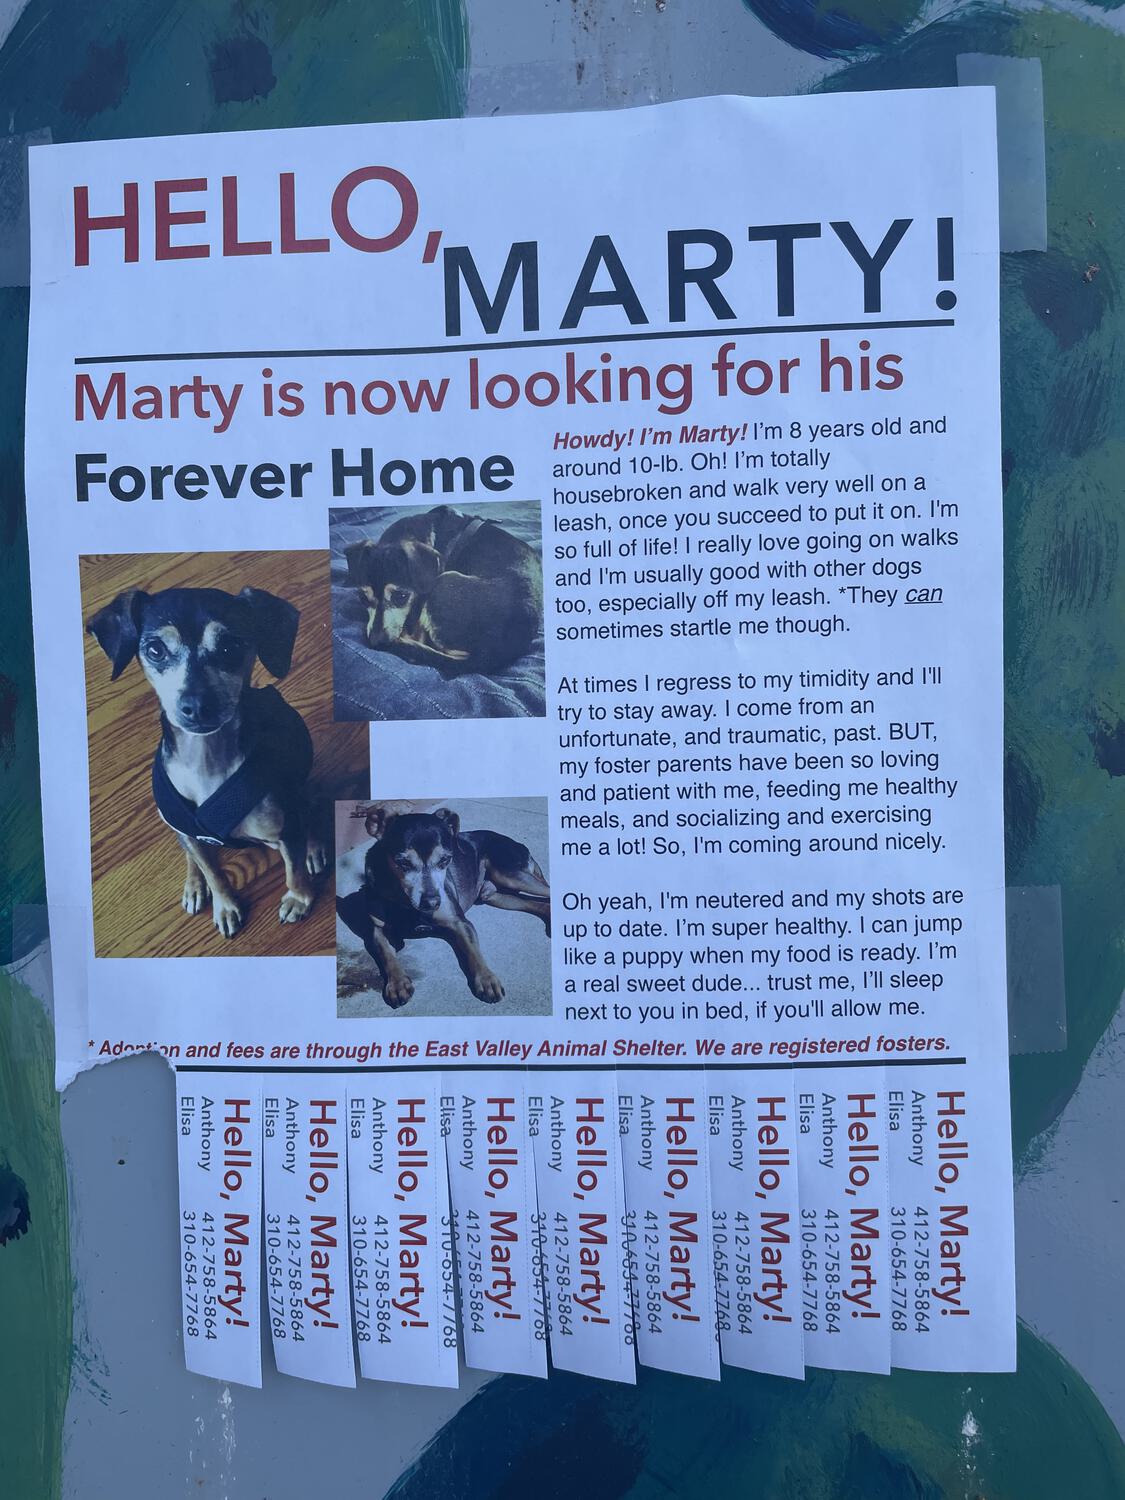 A flyer titled "Hello, Marty! Marty is now looking for his Forever Home" with photos and details on a cute little dog. One tear-off tab with a phone number is missing.